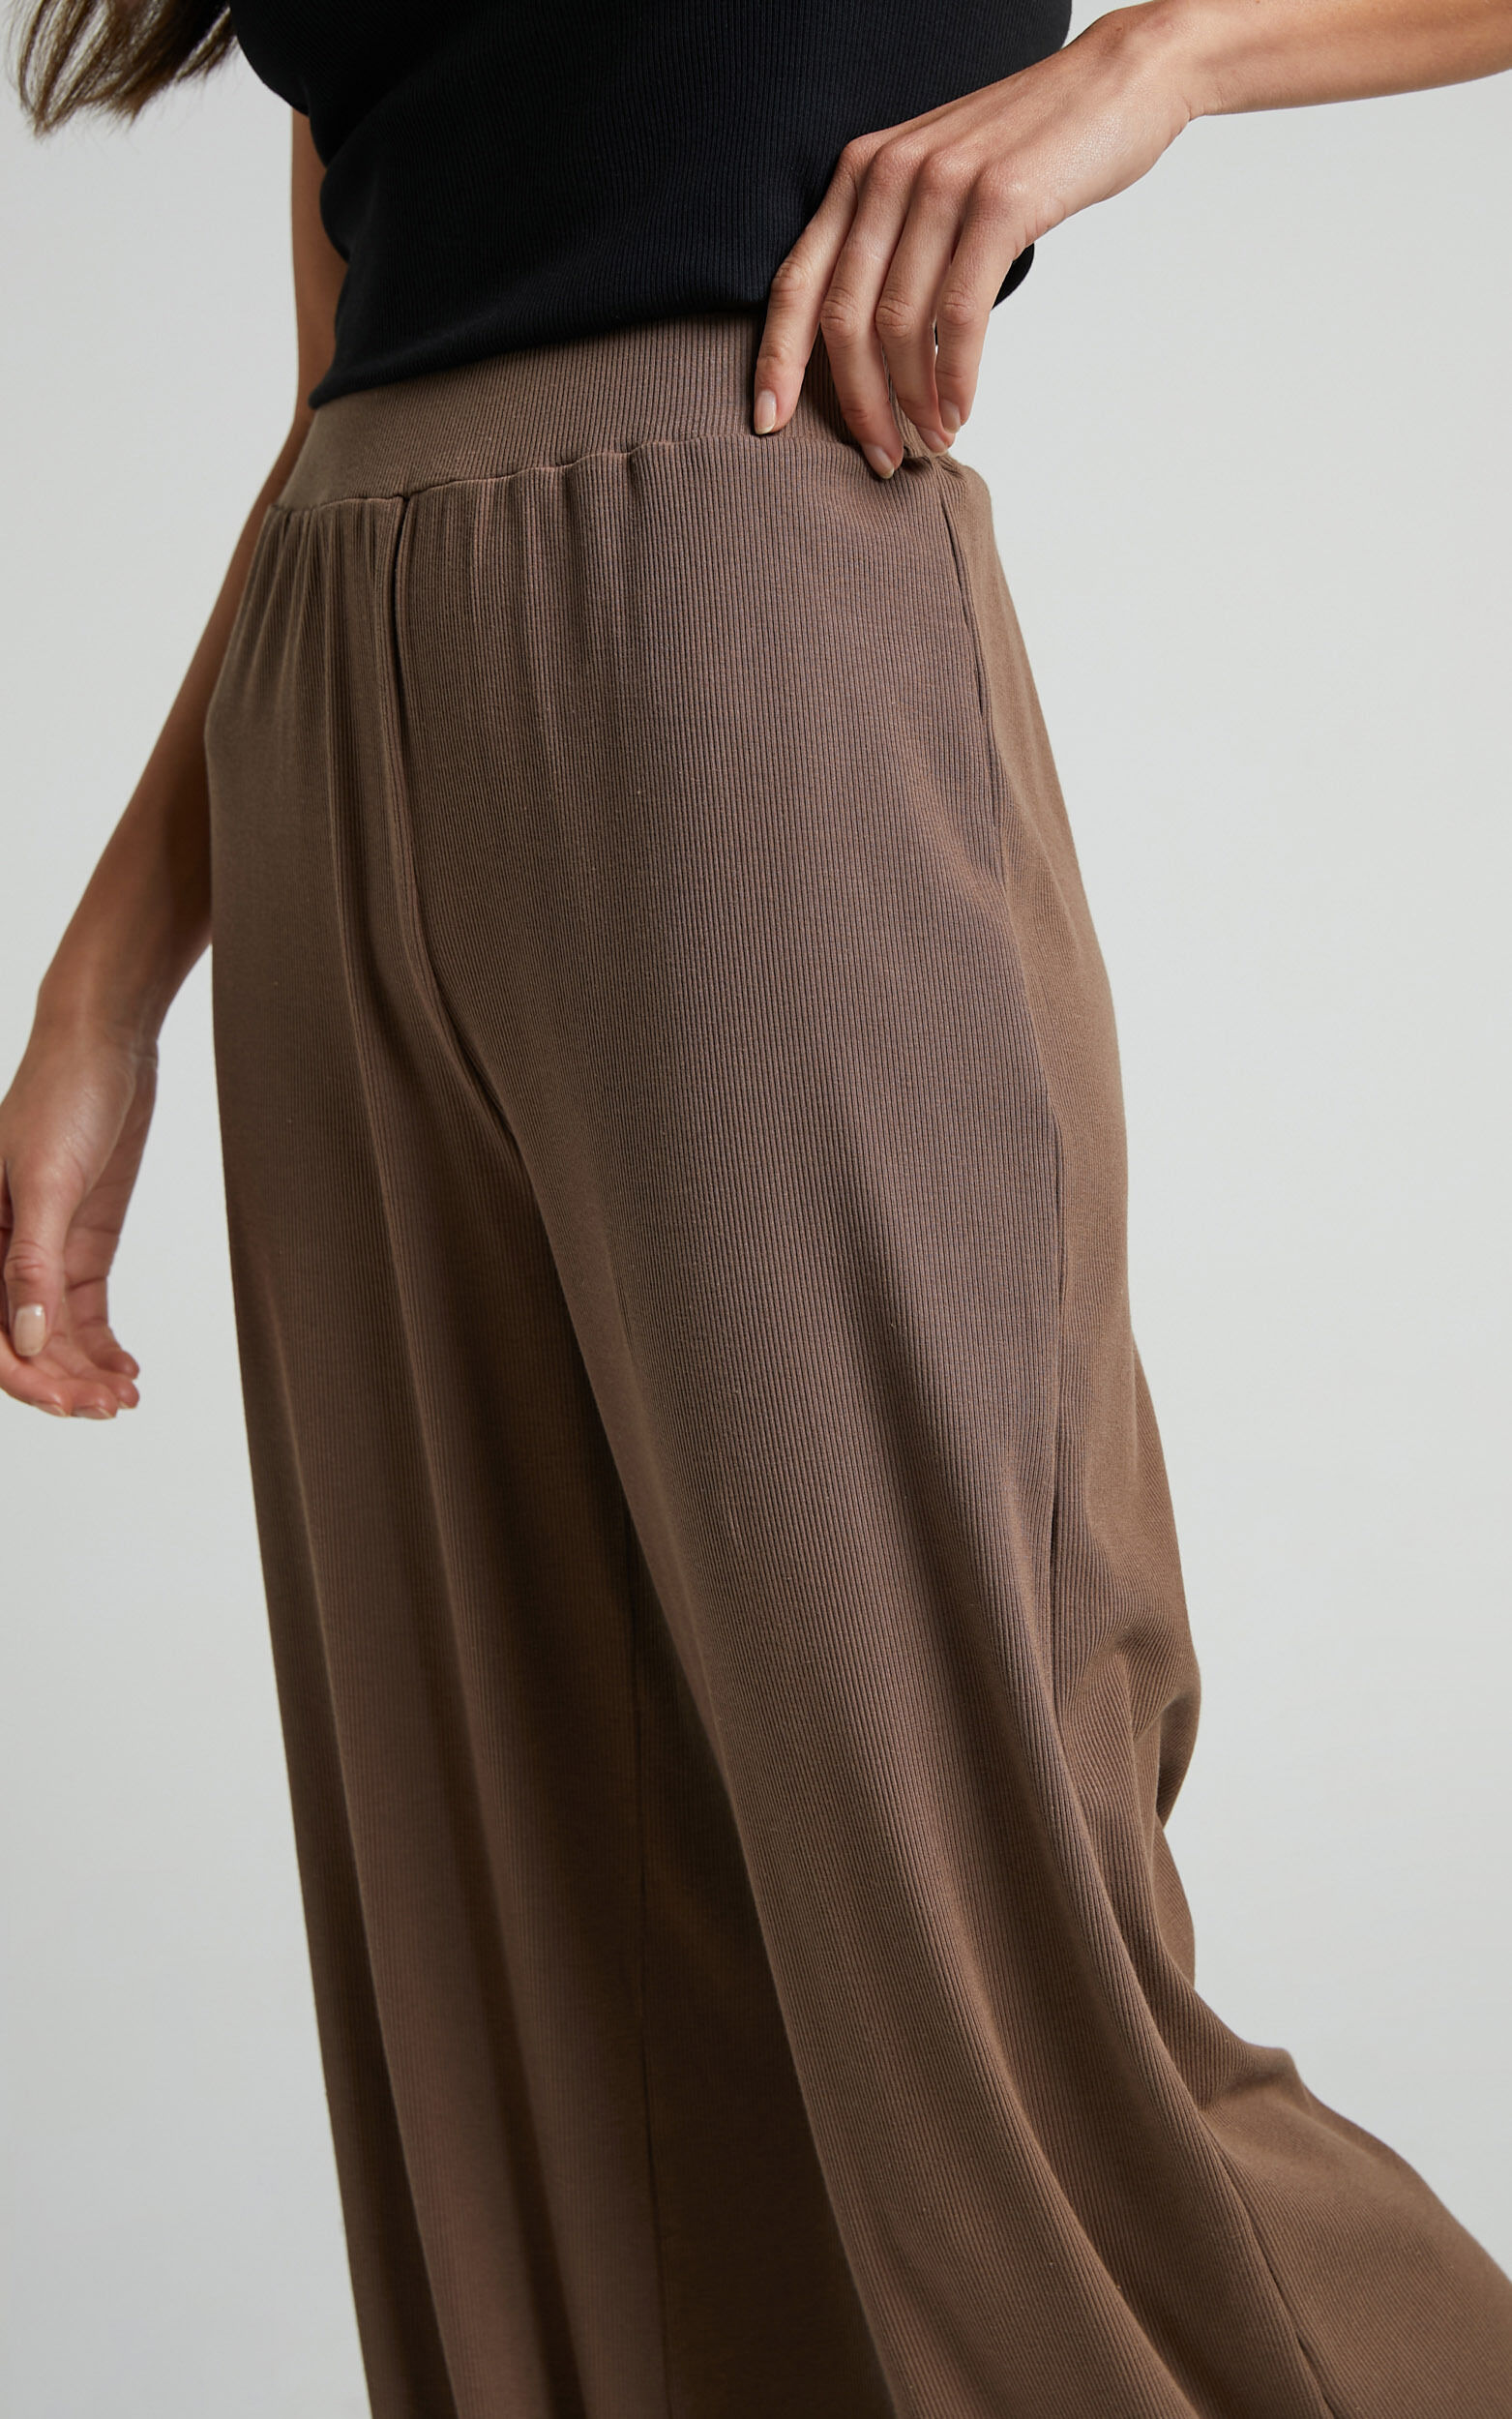 iThinksew - Patterns and More - MOCHA Willa Ribbon Belt Wide Pants